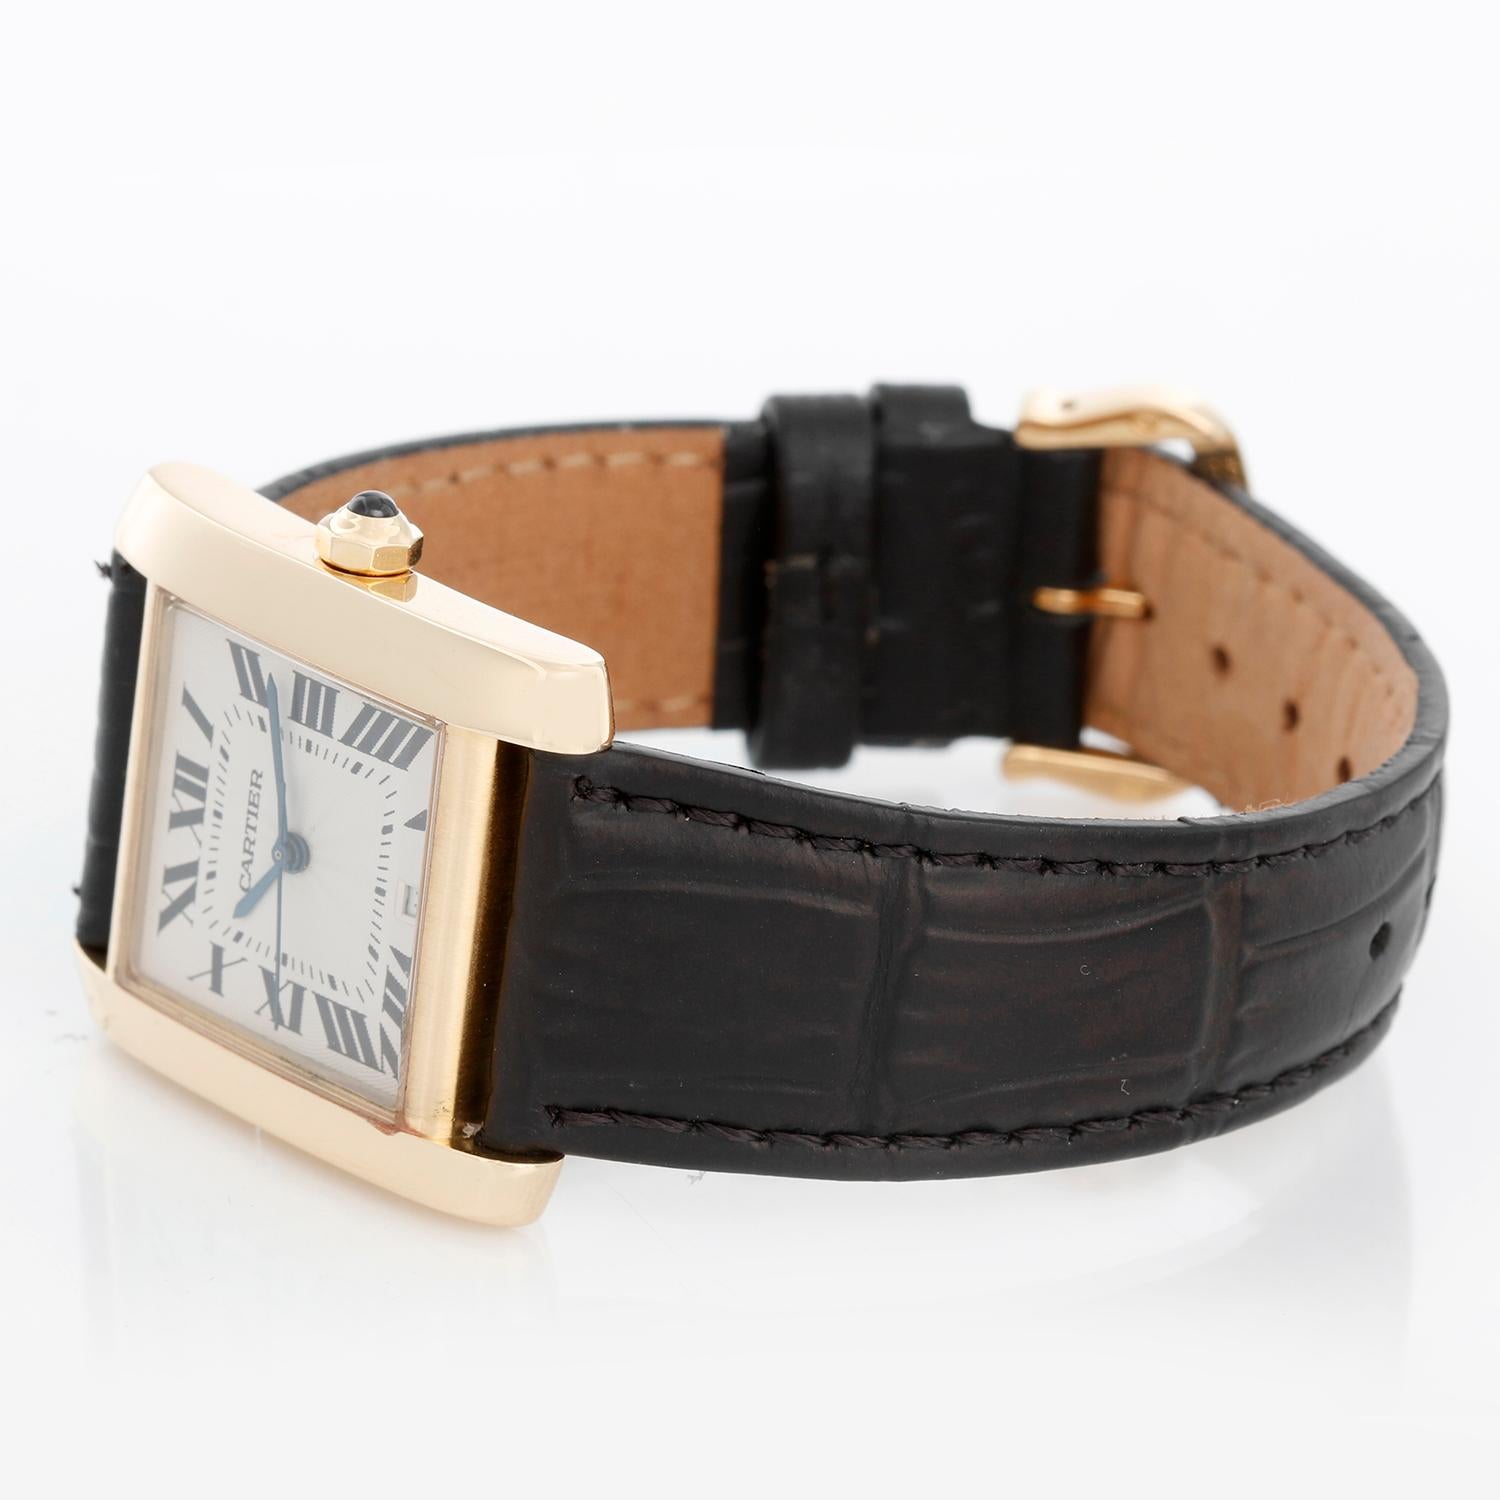 Cartier Tank Francaise 18k Yellow Gold Men's Watch W5000156 1840 - Automatic winding; date. 18k yellow gold case (28 x 32mm ). Silver guilloche dial with black Roman numerals. Black Cartier strap with 18K yellow gold Cartier deployant clasp .